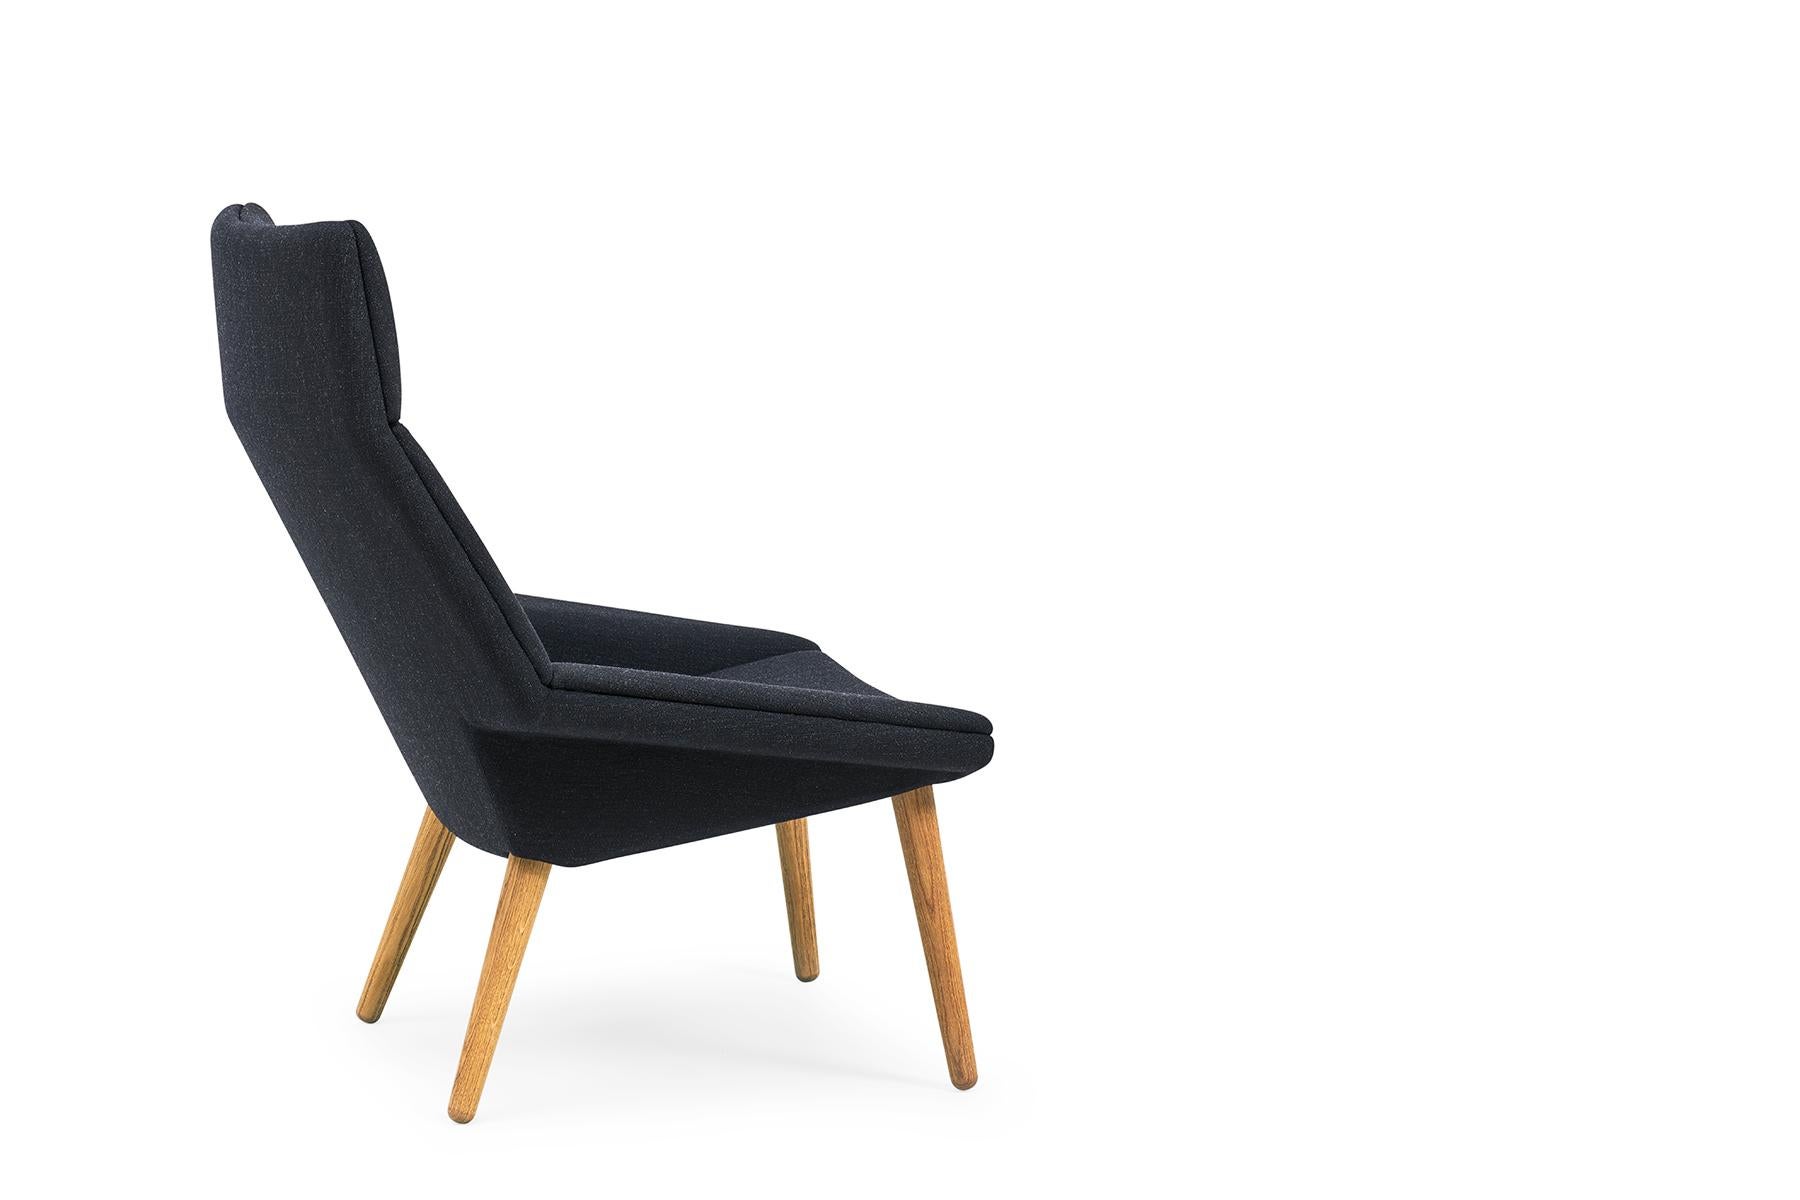 Designed by Nanna & Jørgen Ditzel in 1955, the Tux lounge chair is a wonderful addition to any modern home or office. The chair is hand built at GETAMA’s factory in Gedsted, Denmark by skilled cabinetmakers using traditional Scandinavian